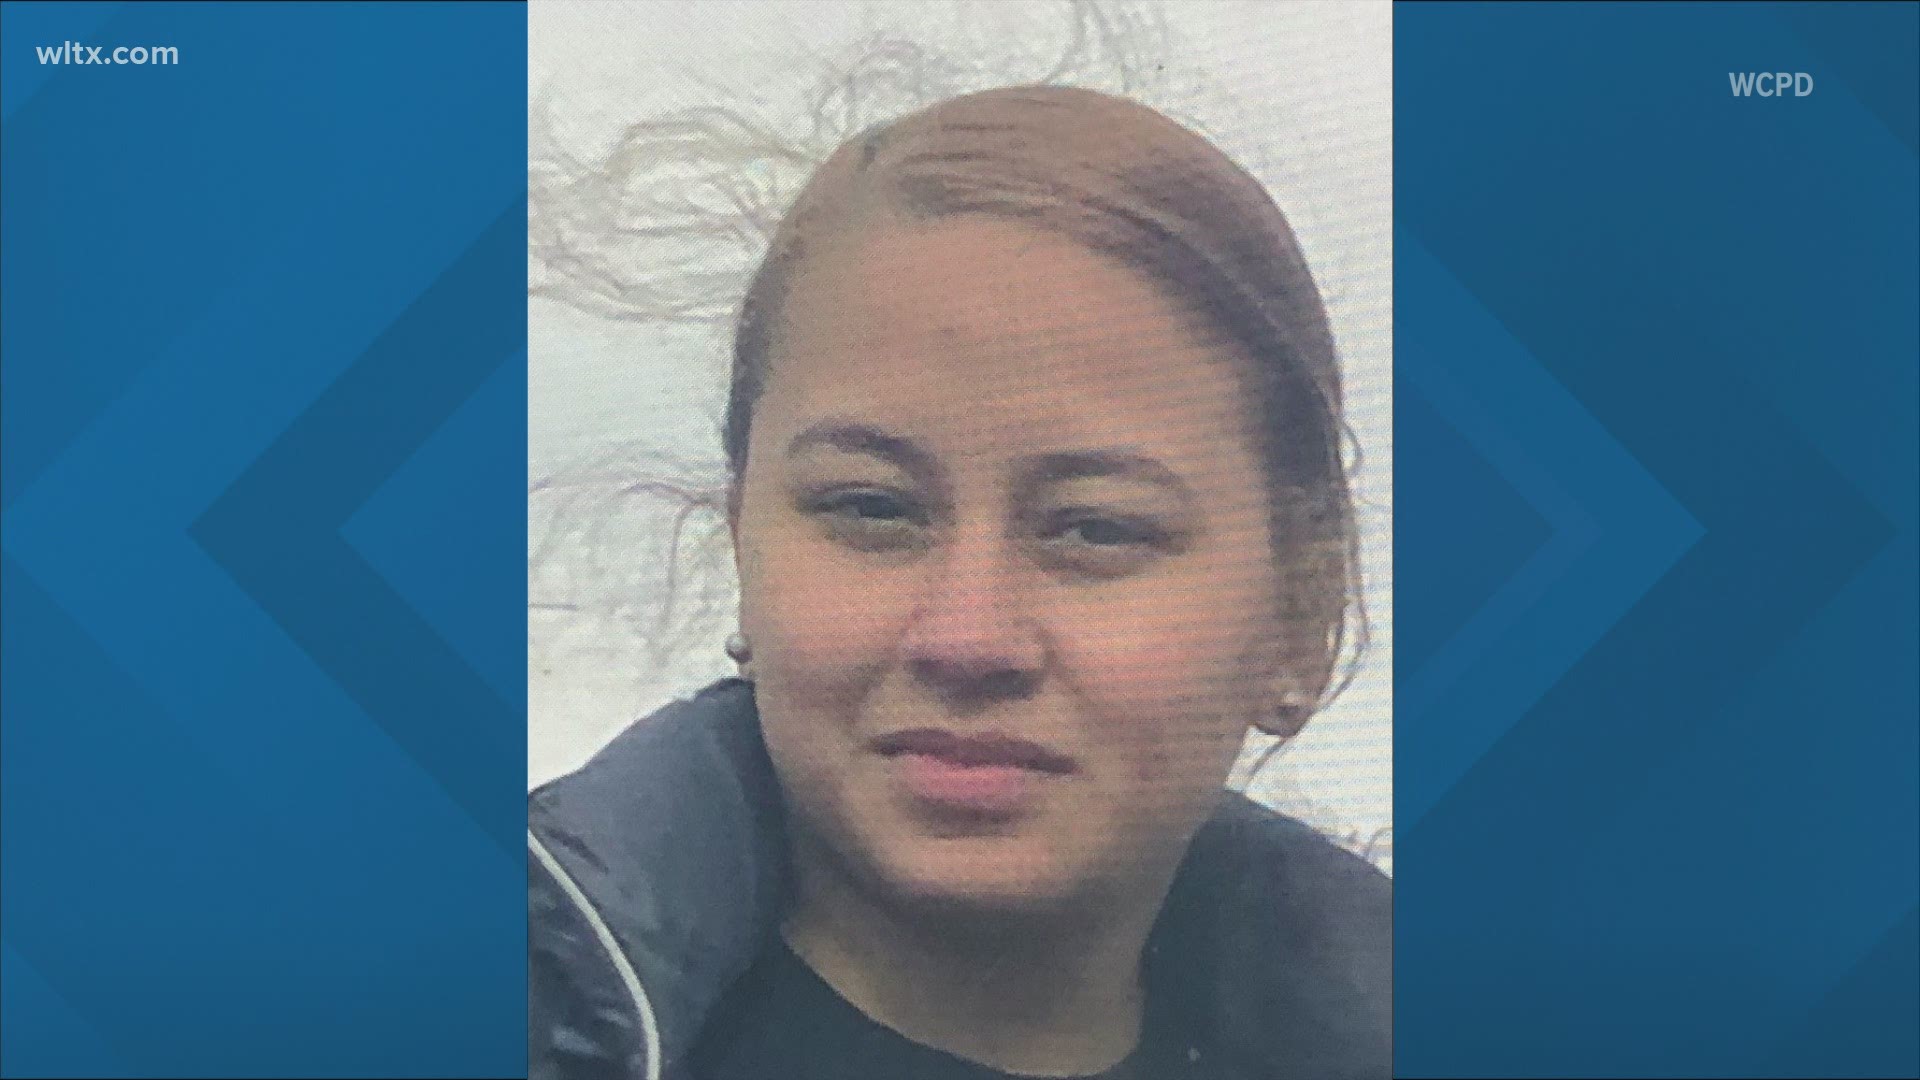 16-year-old Nazareth Nicole Sanchez-Peralta was last seen on March 30 at her place of employment on Airport Boulevard in West Columbia.